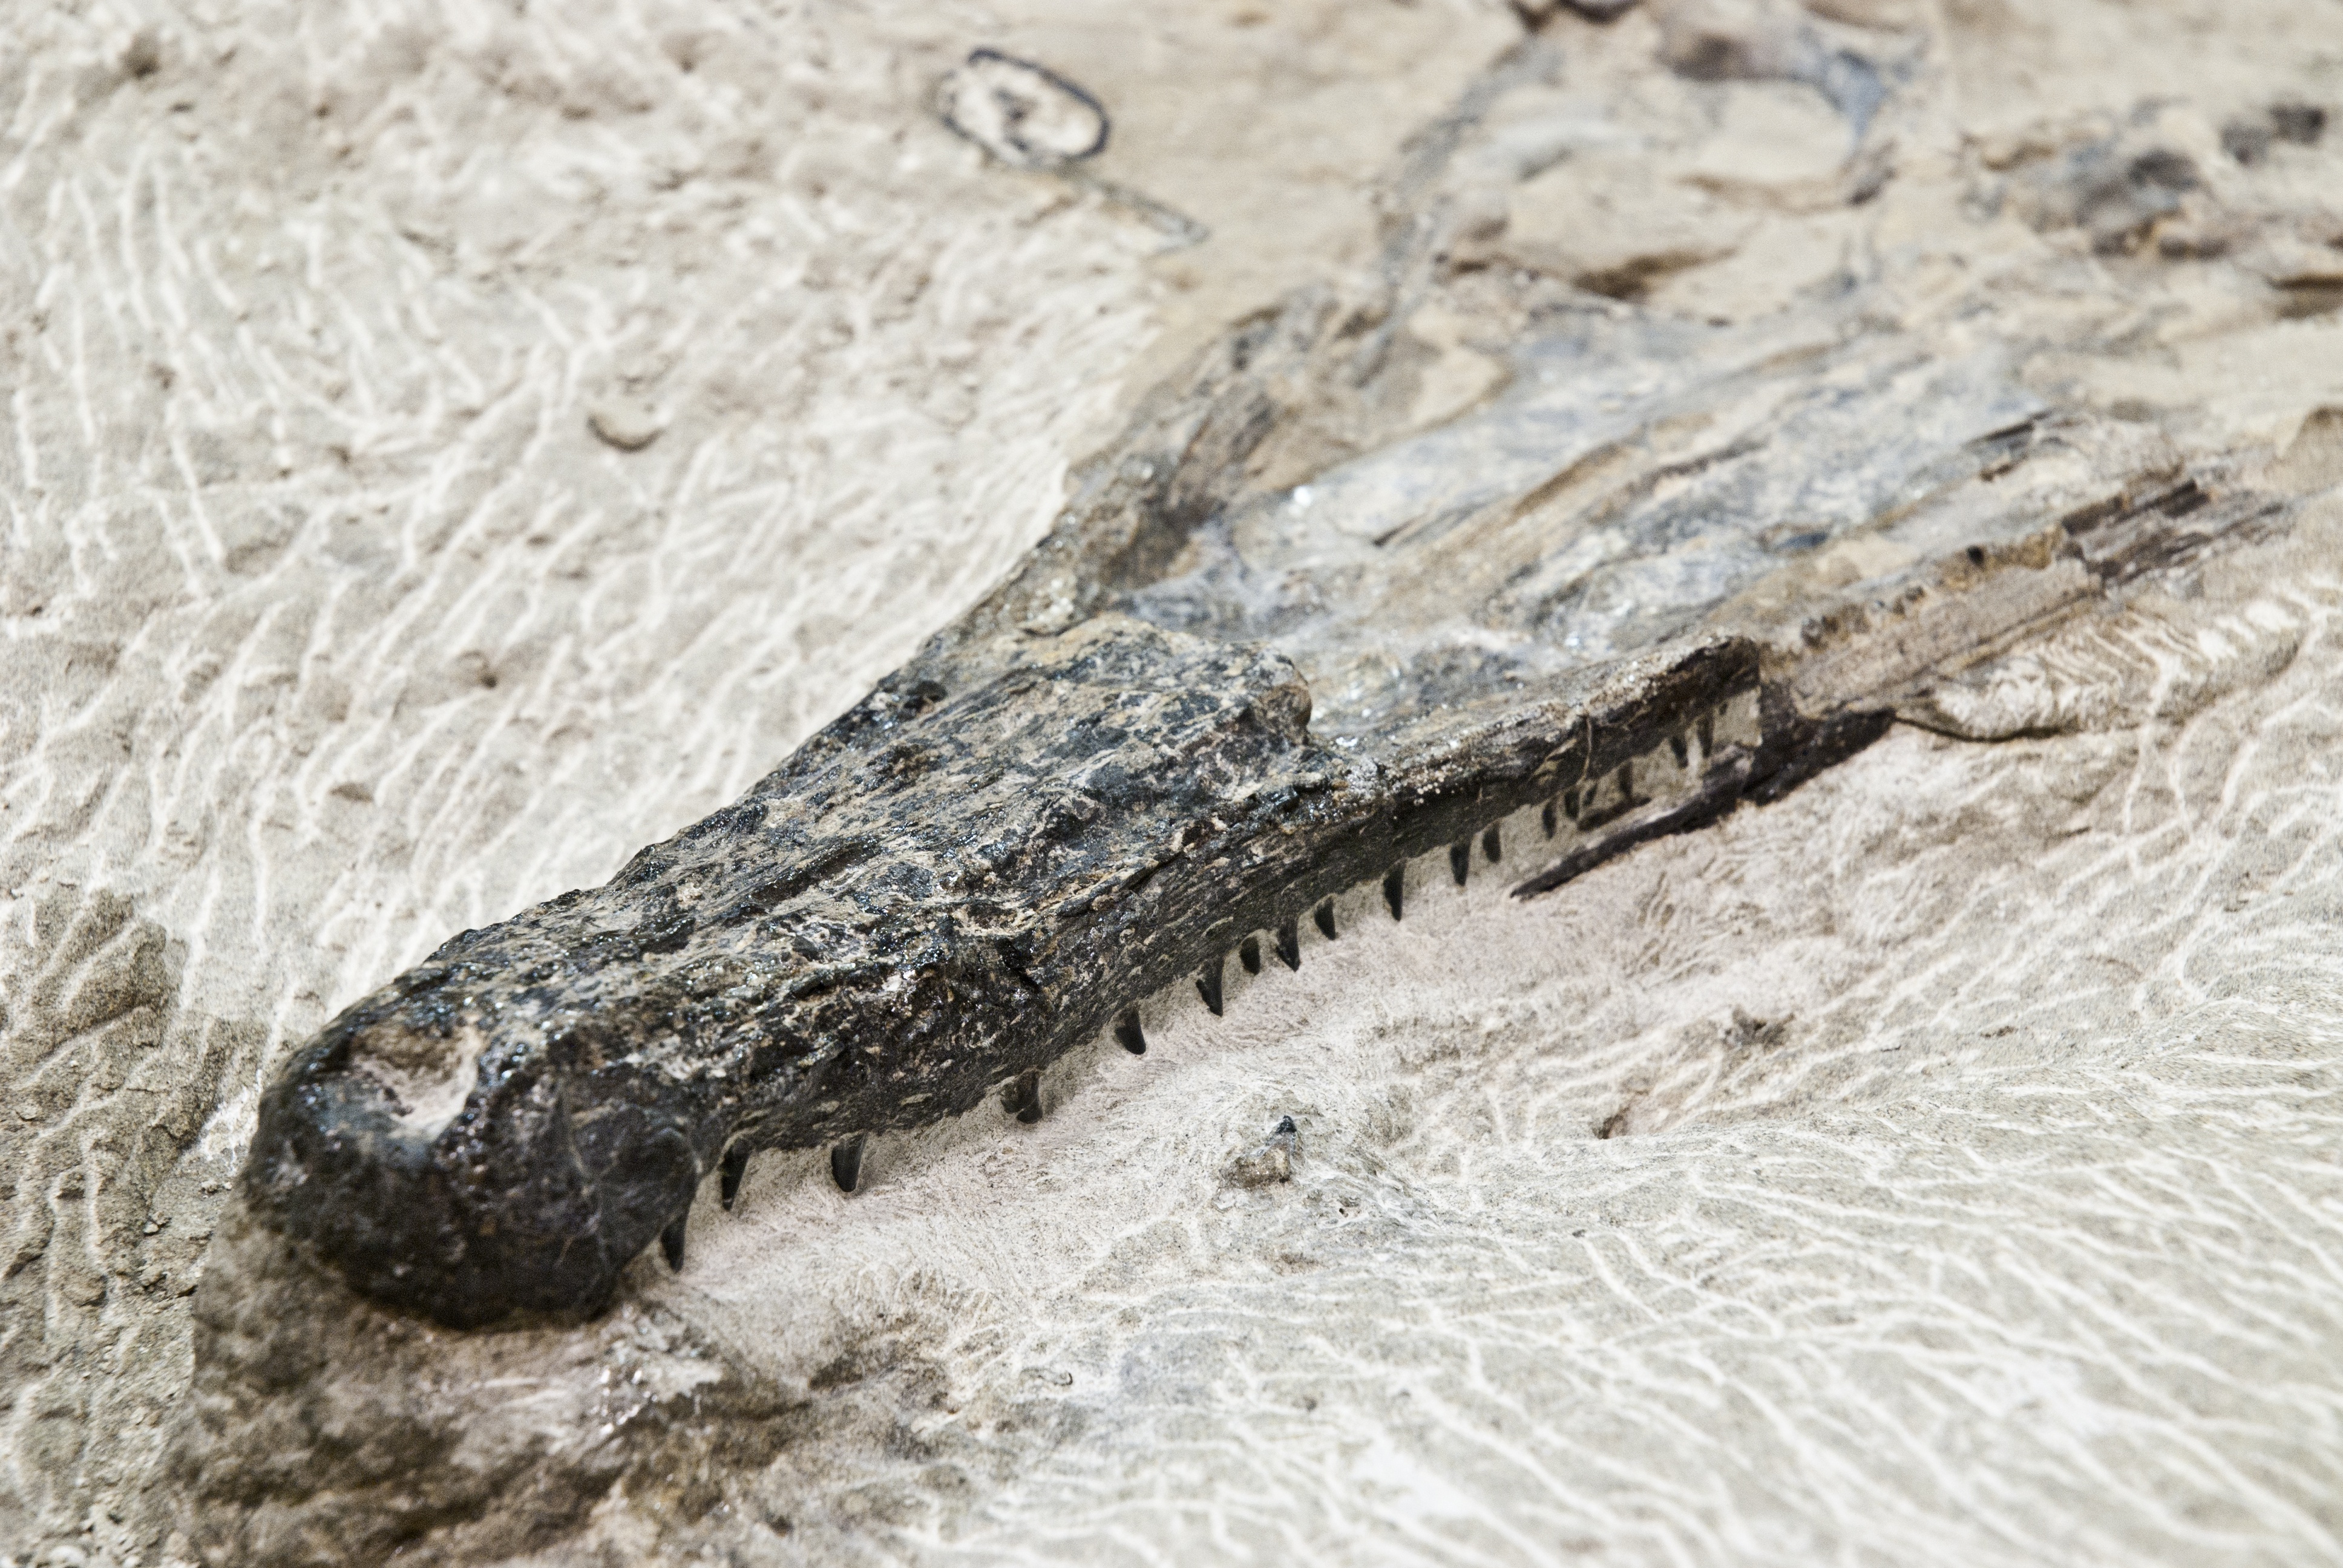 RARE FIND – This fossil of a Champsosaur was recently found by an Olds College employee during a landscaping project on campus.